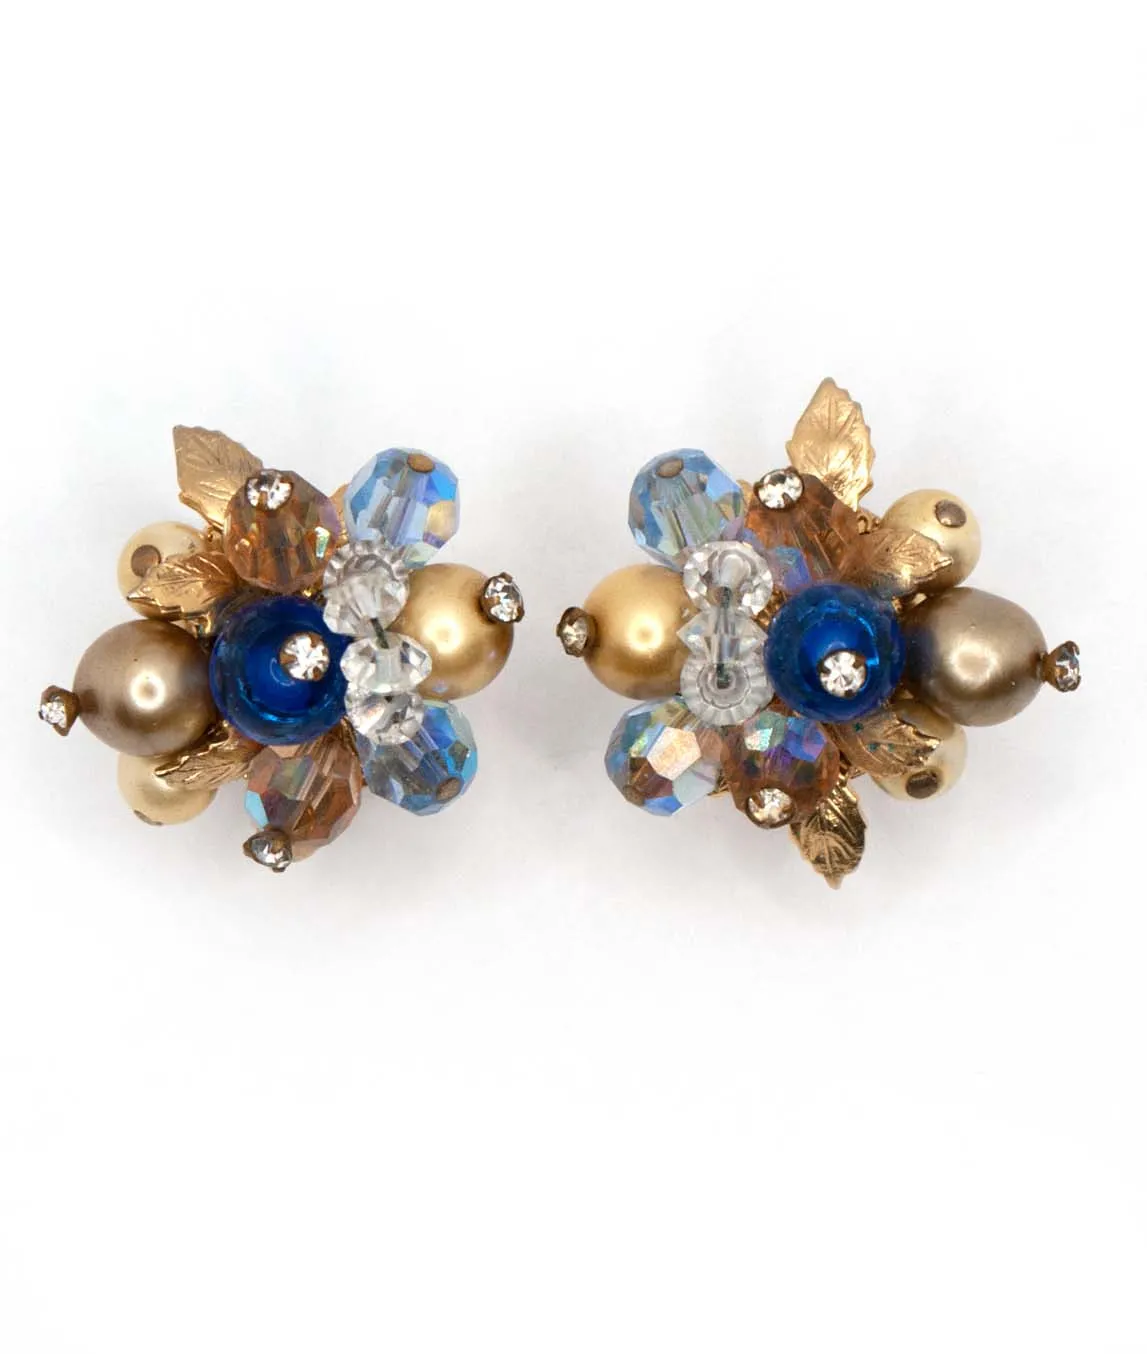 Vintage Vendôme earrings constructed from gold painted and blue faceted beads with rhinestones